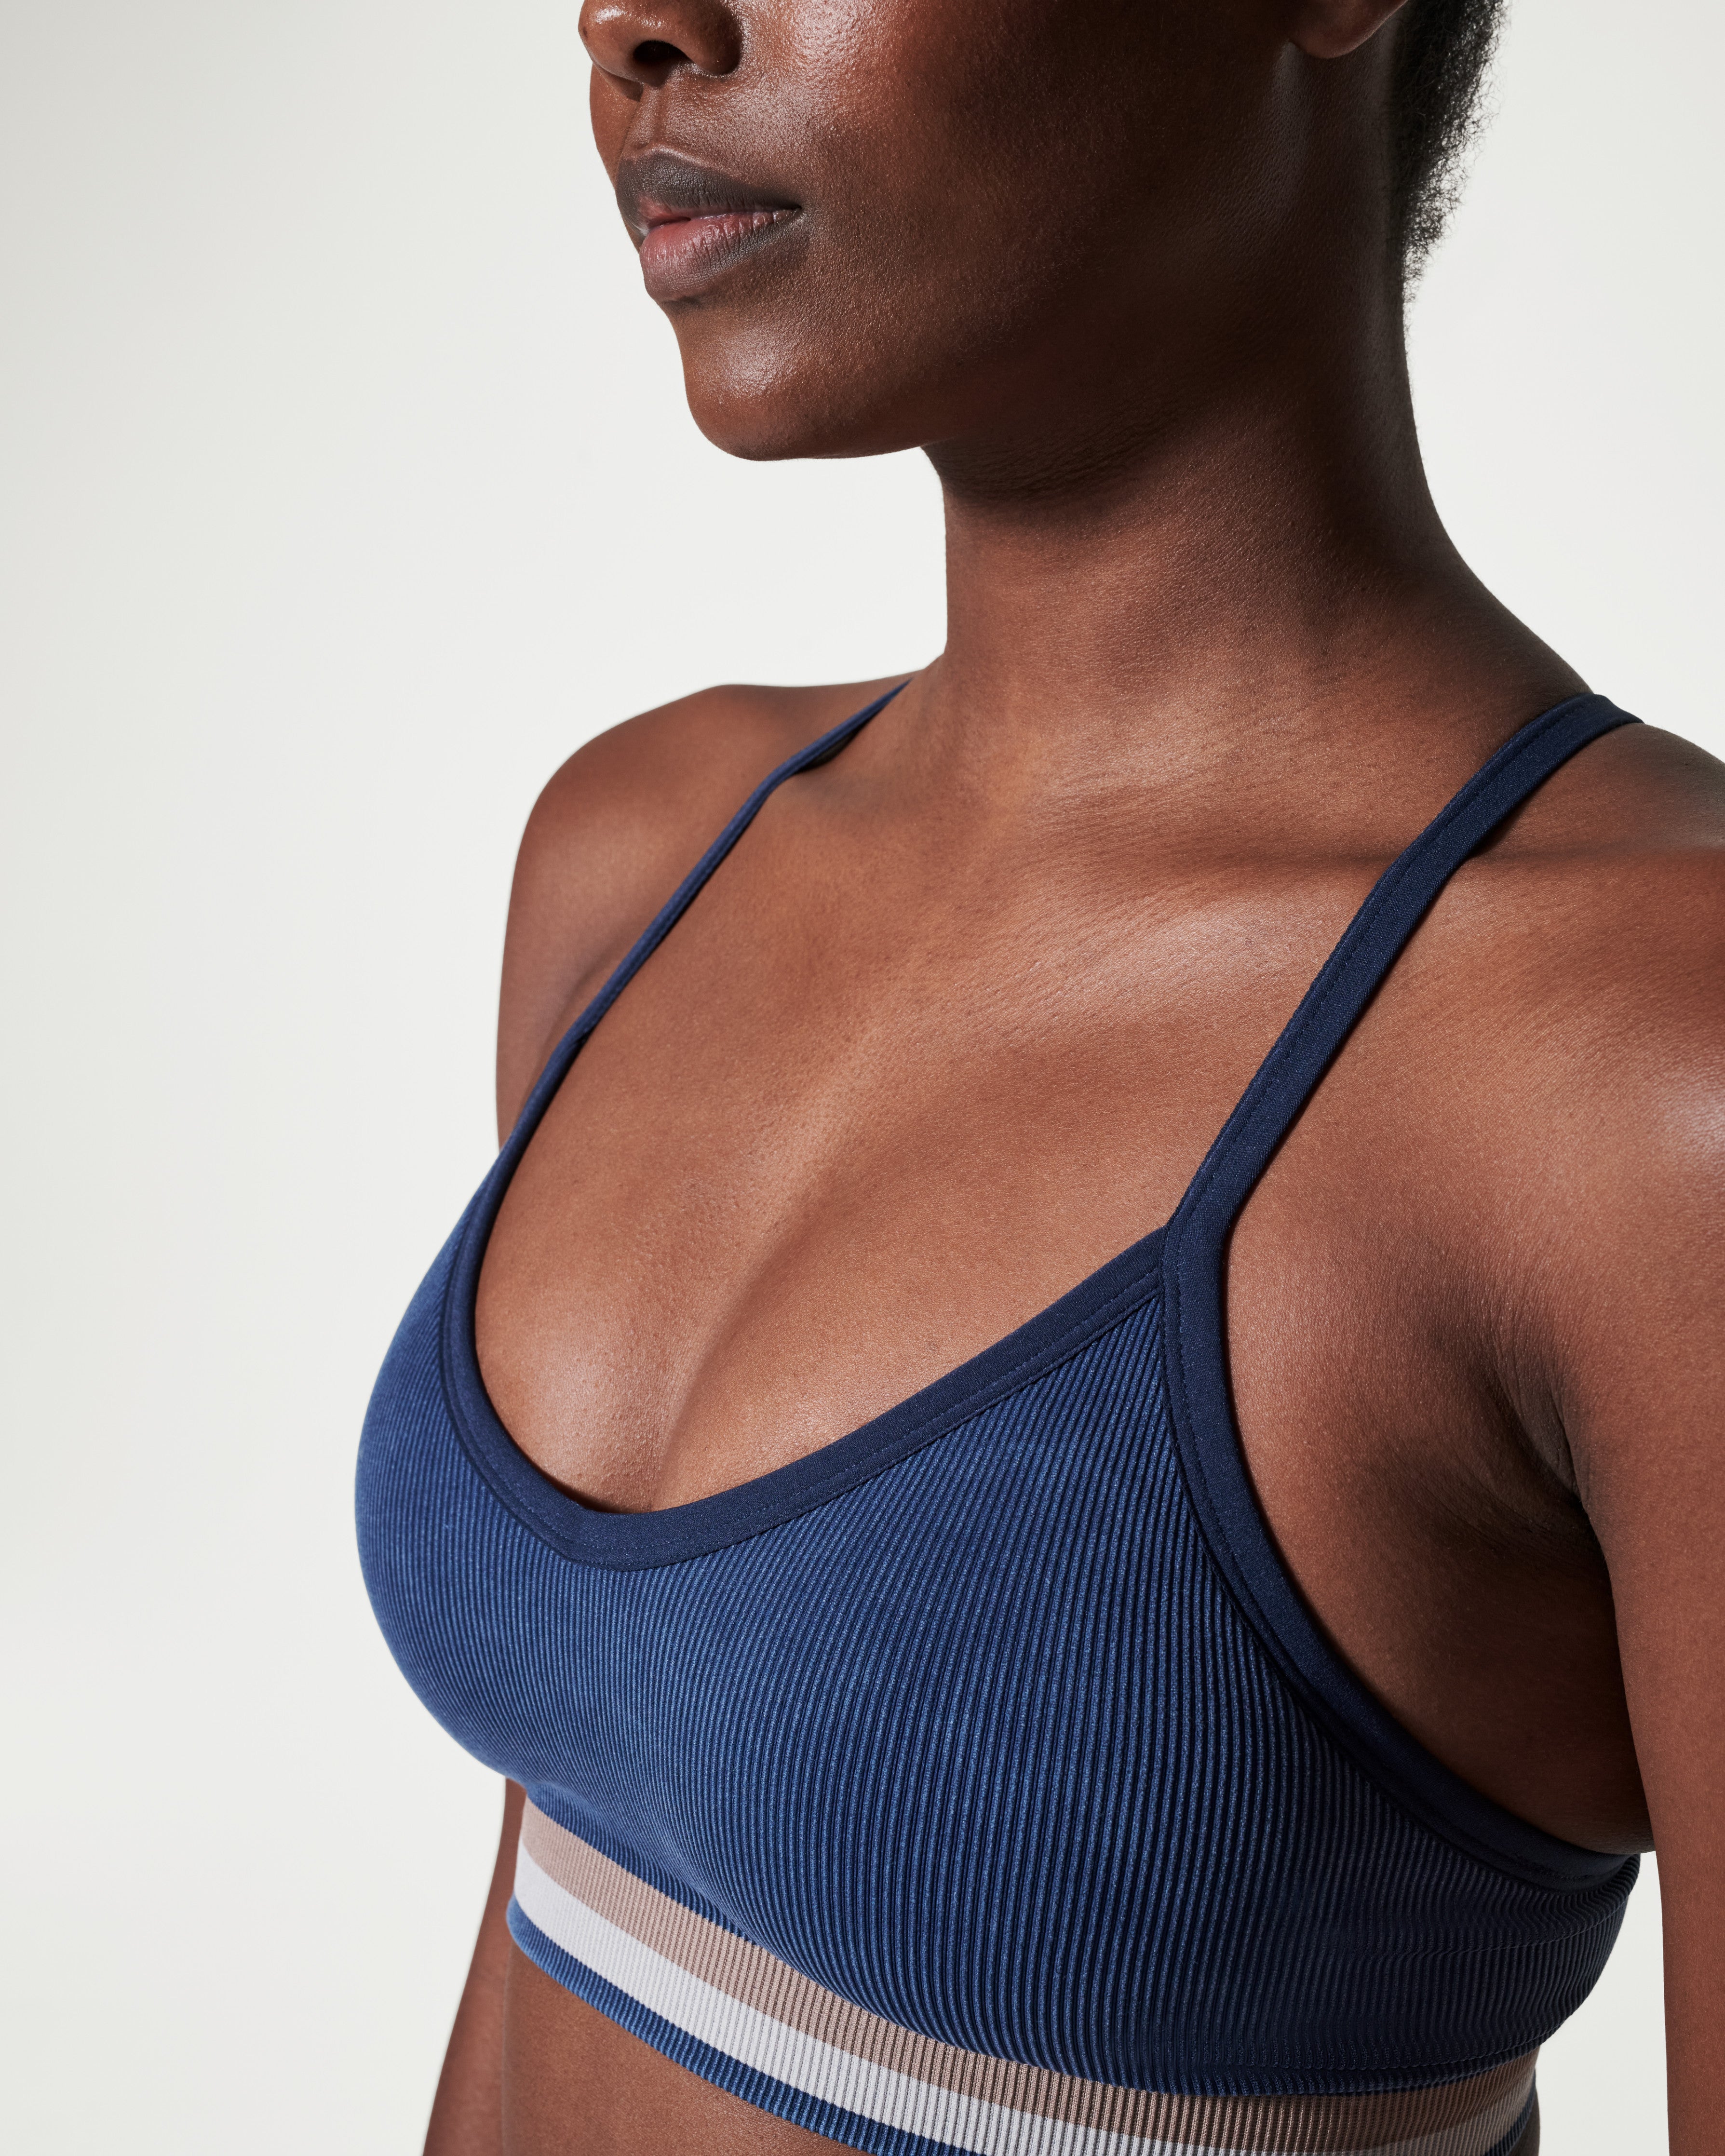 Stretchy Lace Trim Sports Sleep Spanx Minimizer Bra Seamless, Soft, And  Comfortable From Nbkingstar, $20.87